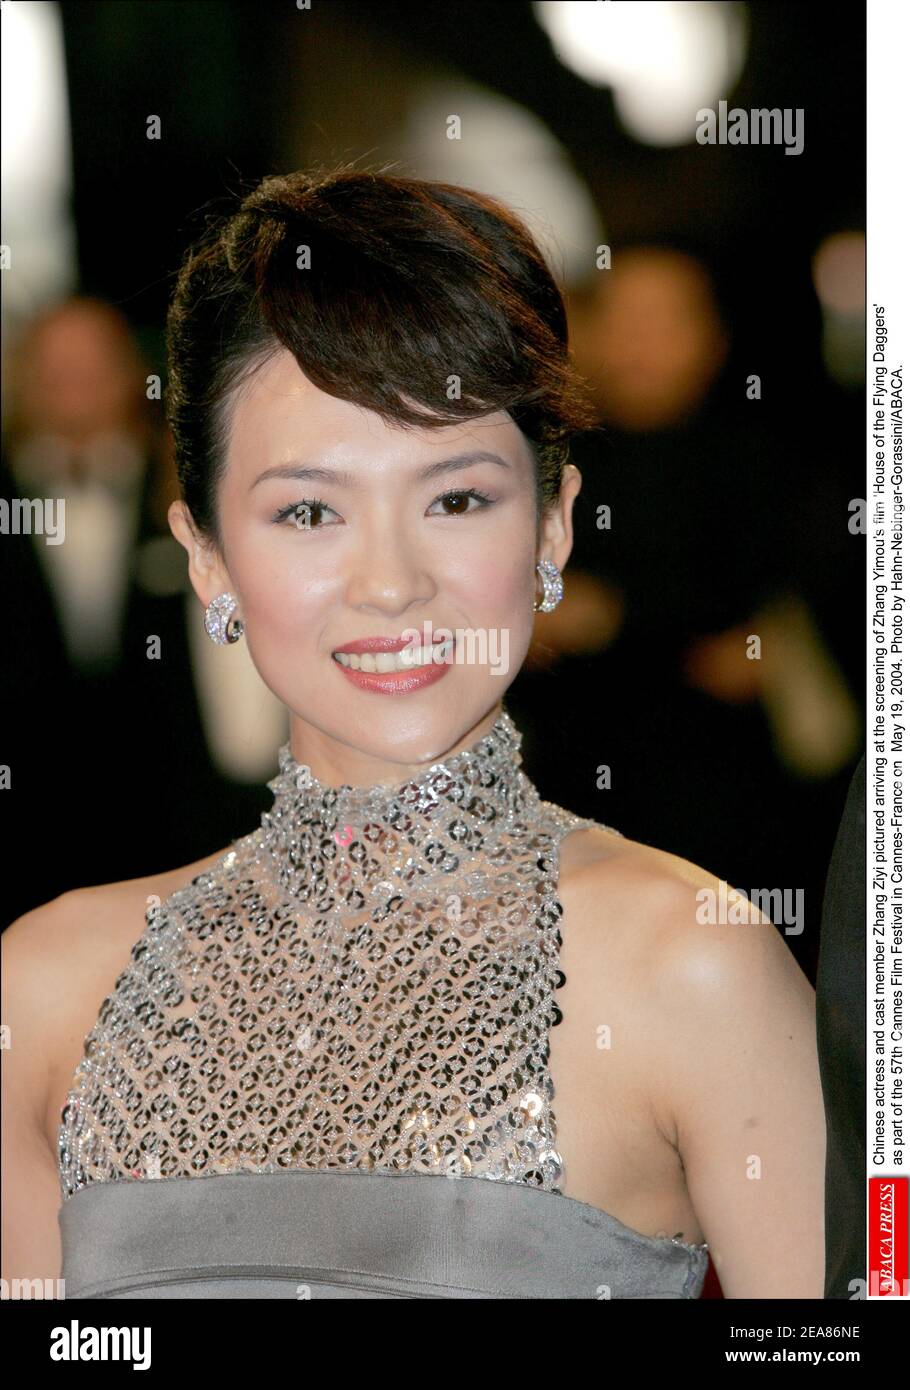 Chinese actress and cast member Zhang Ziyi pictured arriving at the screening of Zhang Yimou's film 'House of the Flying Daggers' as part of the 57th Cannes Film Festival in Cannes-France on May 19, 2004. Photo by Hahn-Nebinger-Gorassini/ABACA. Stock Photo